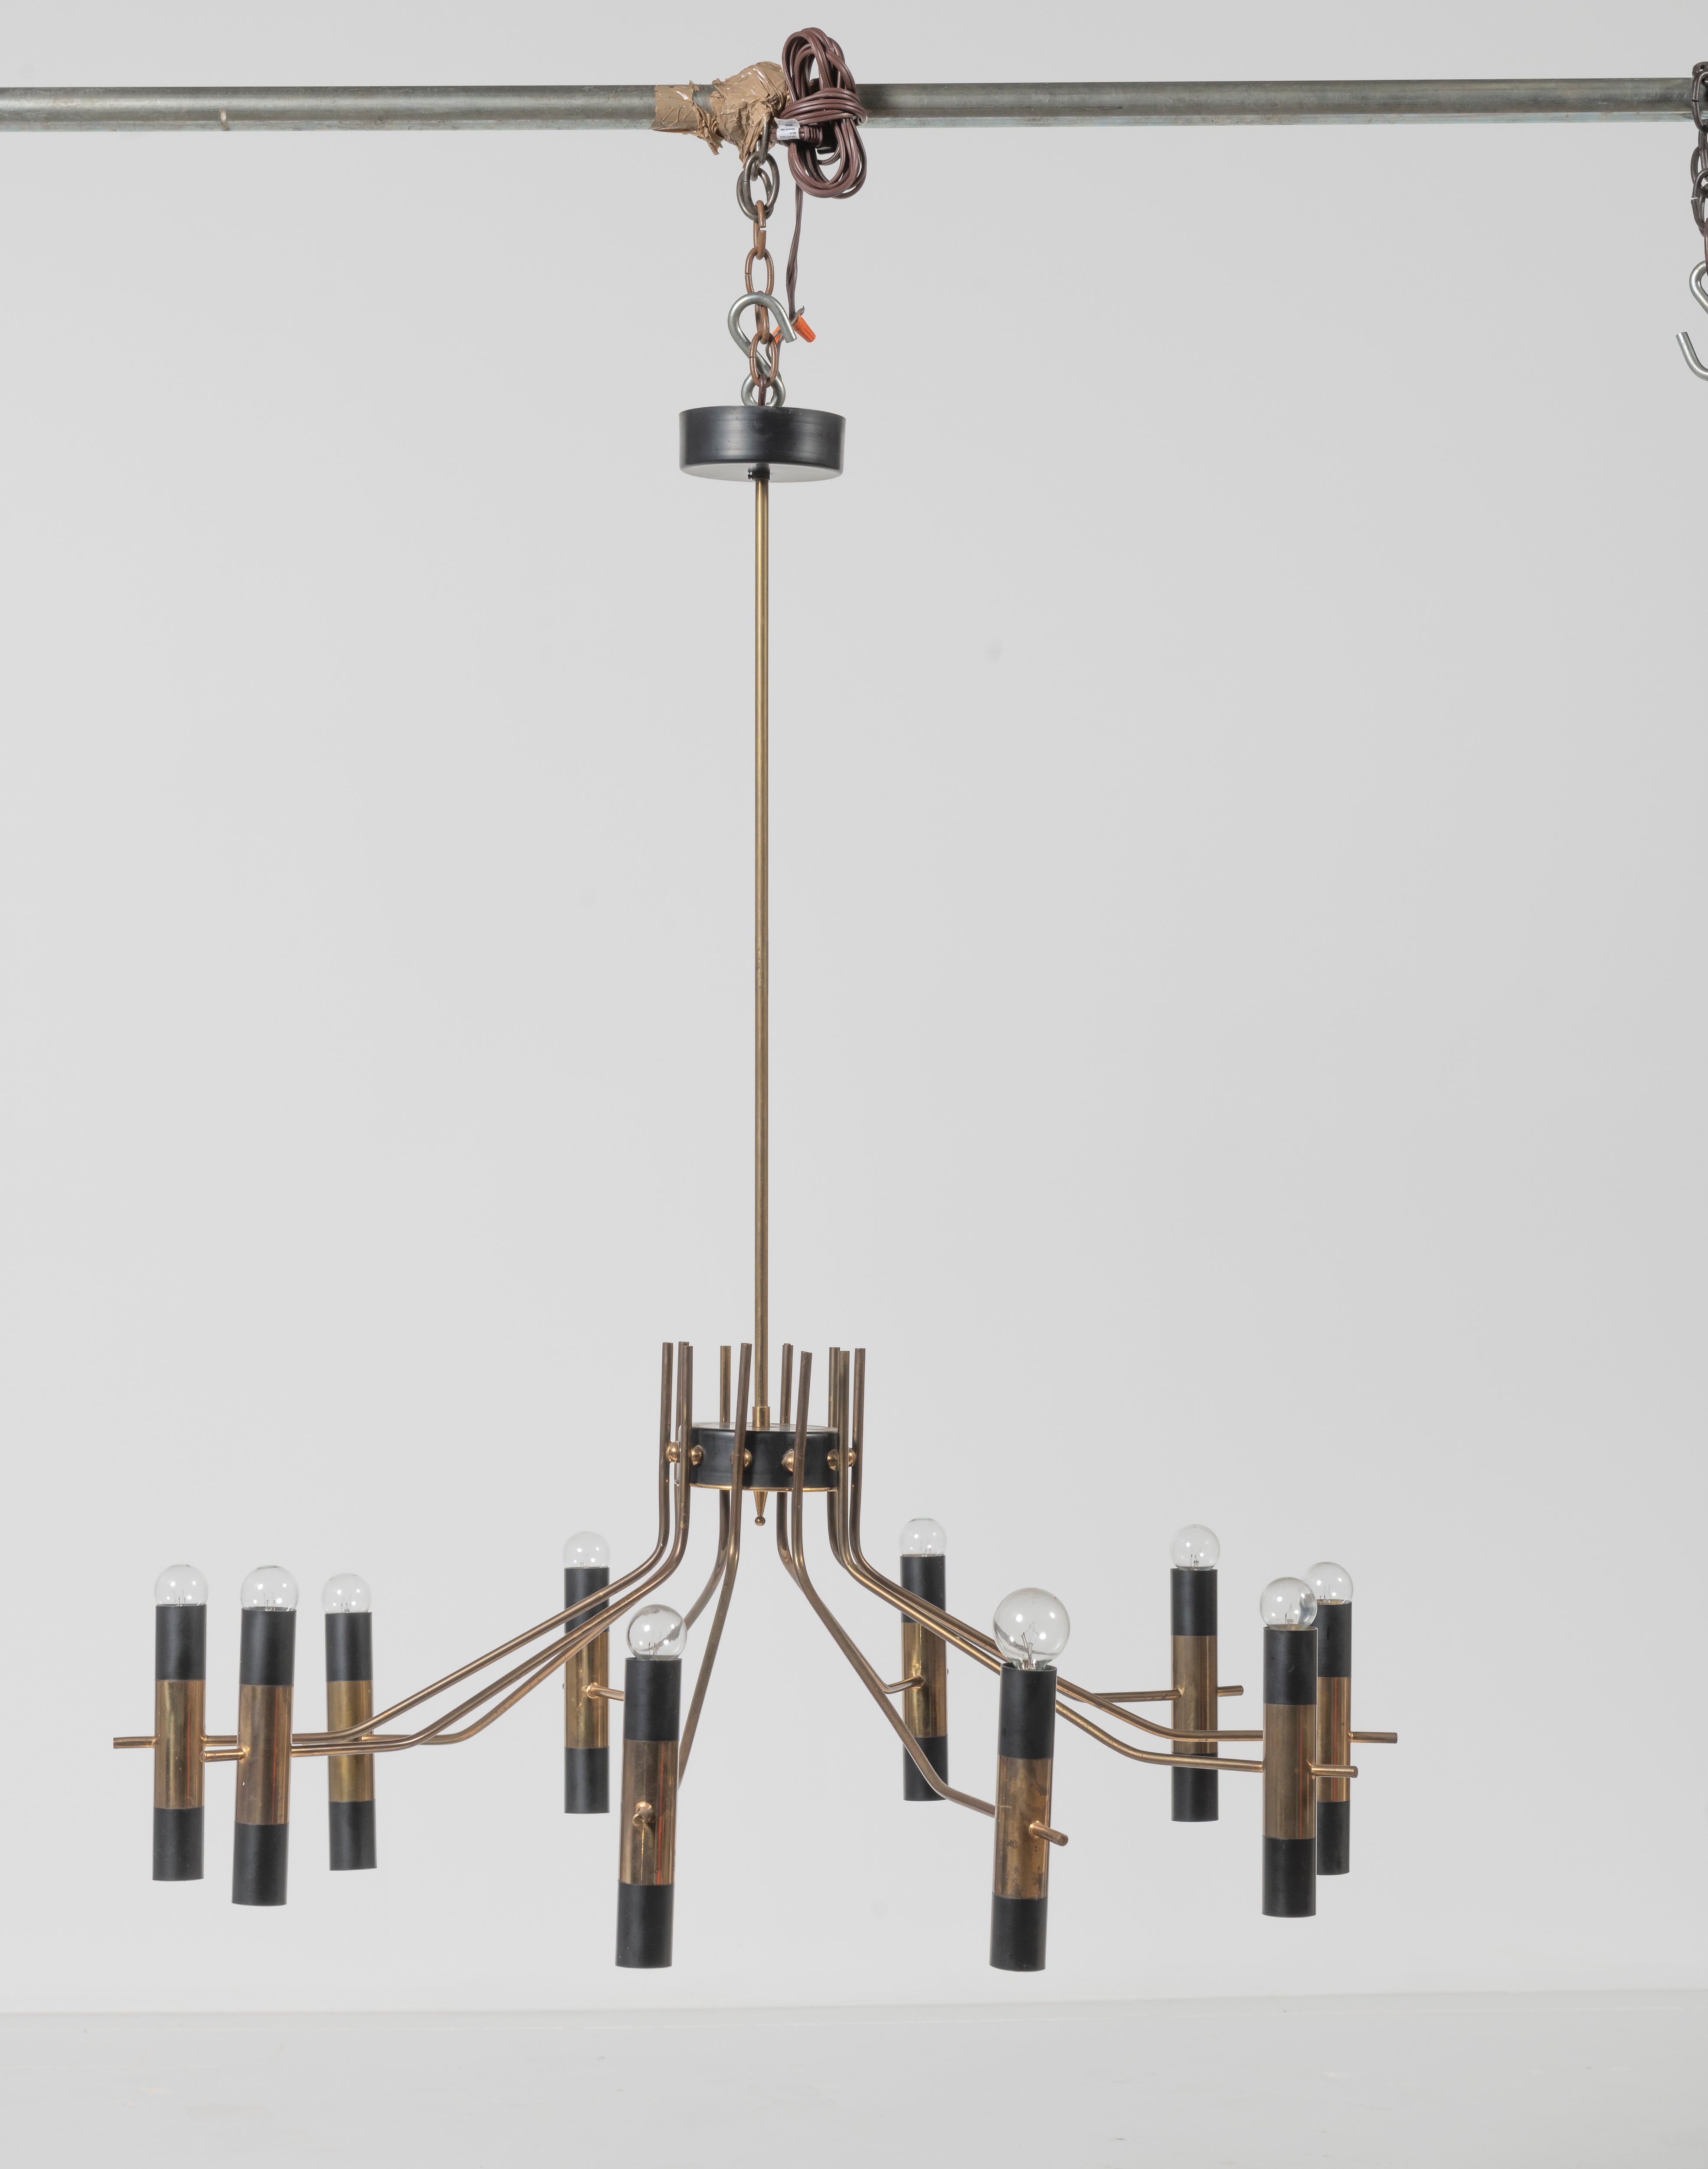 Designed by Oscar Torlasco, this vintage chandelier has 10 lights. Model 582 for Enlightenment, Milano, 1961. Piece is wired though not UL Listed.